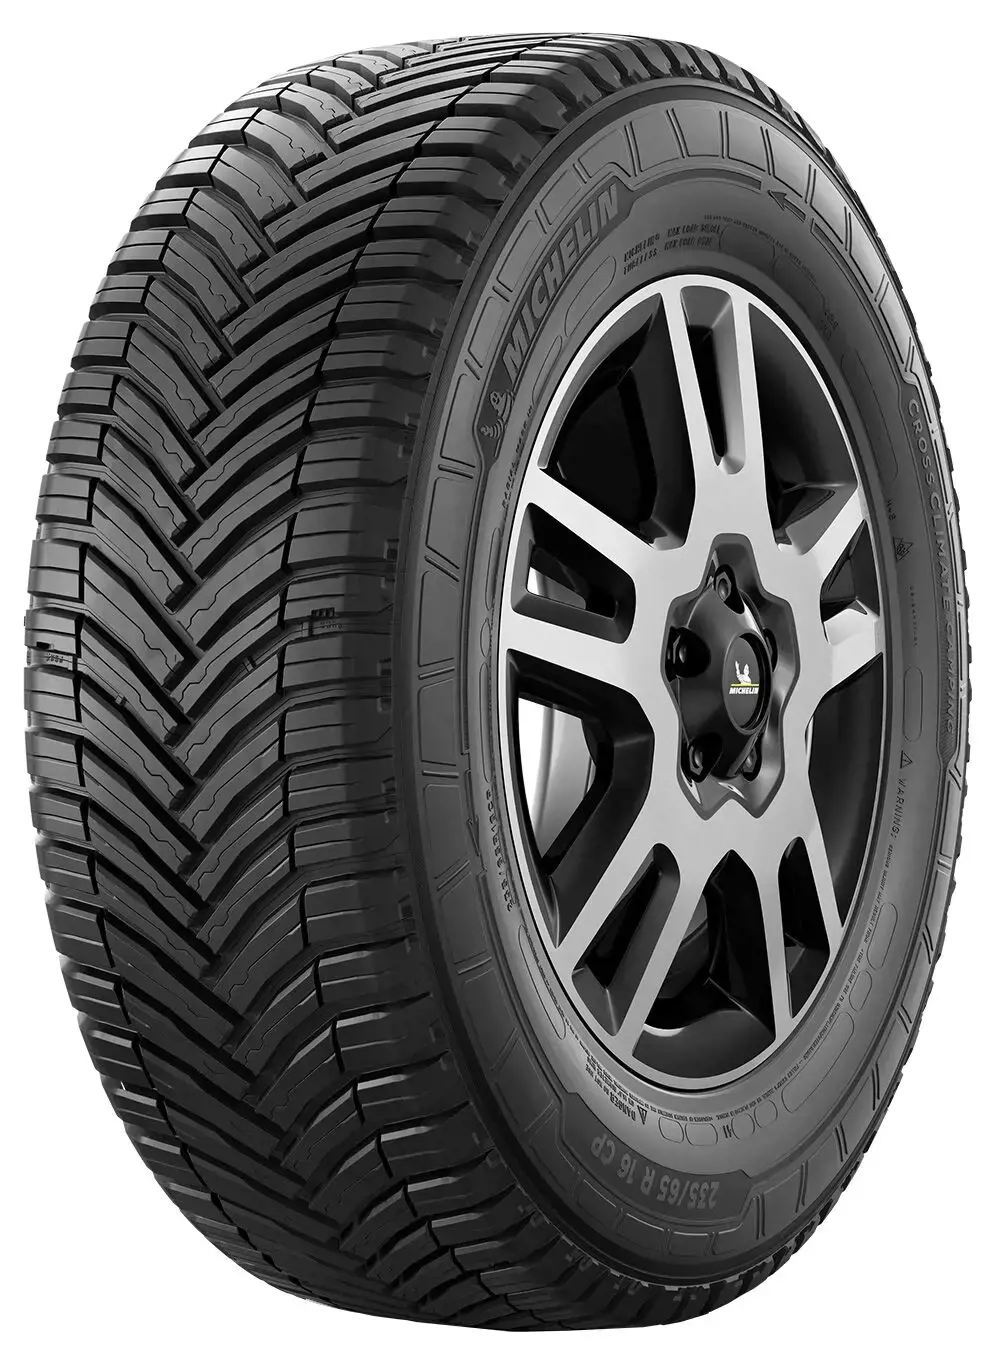 225/75 R16C Camping Climate Cross 118R/116 MICHELIN